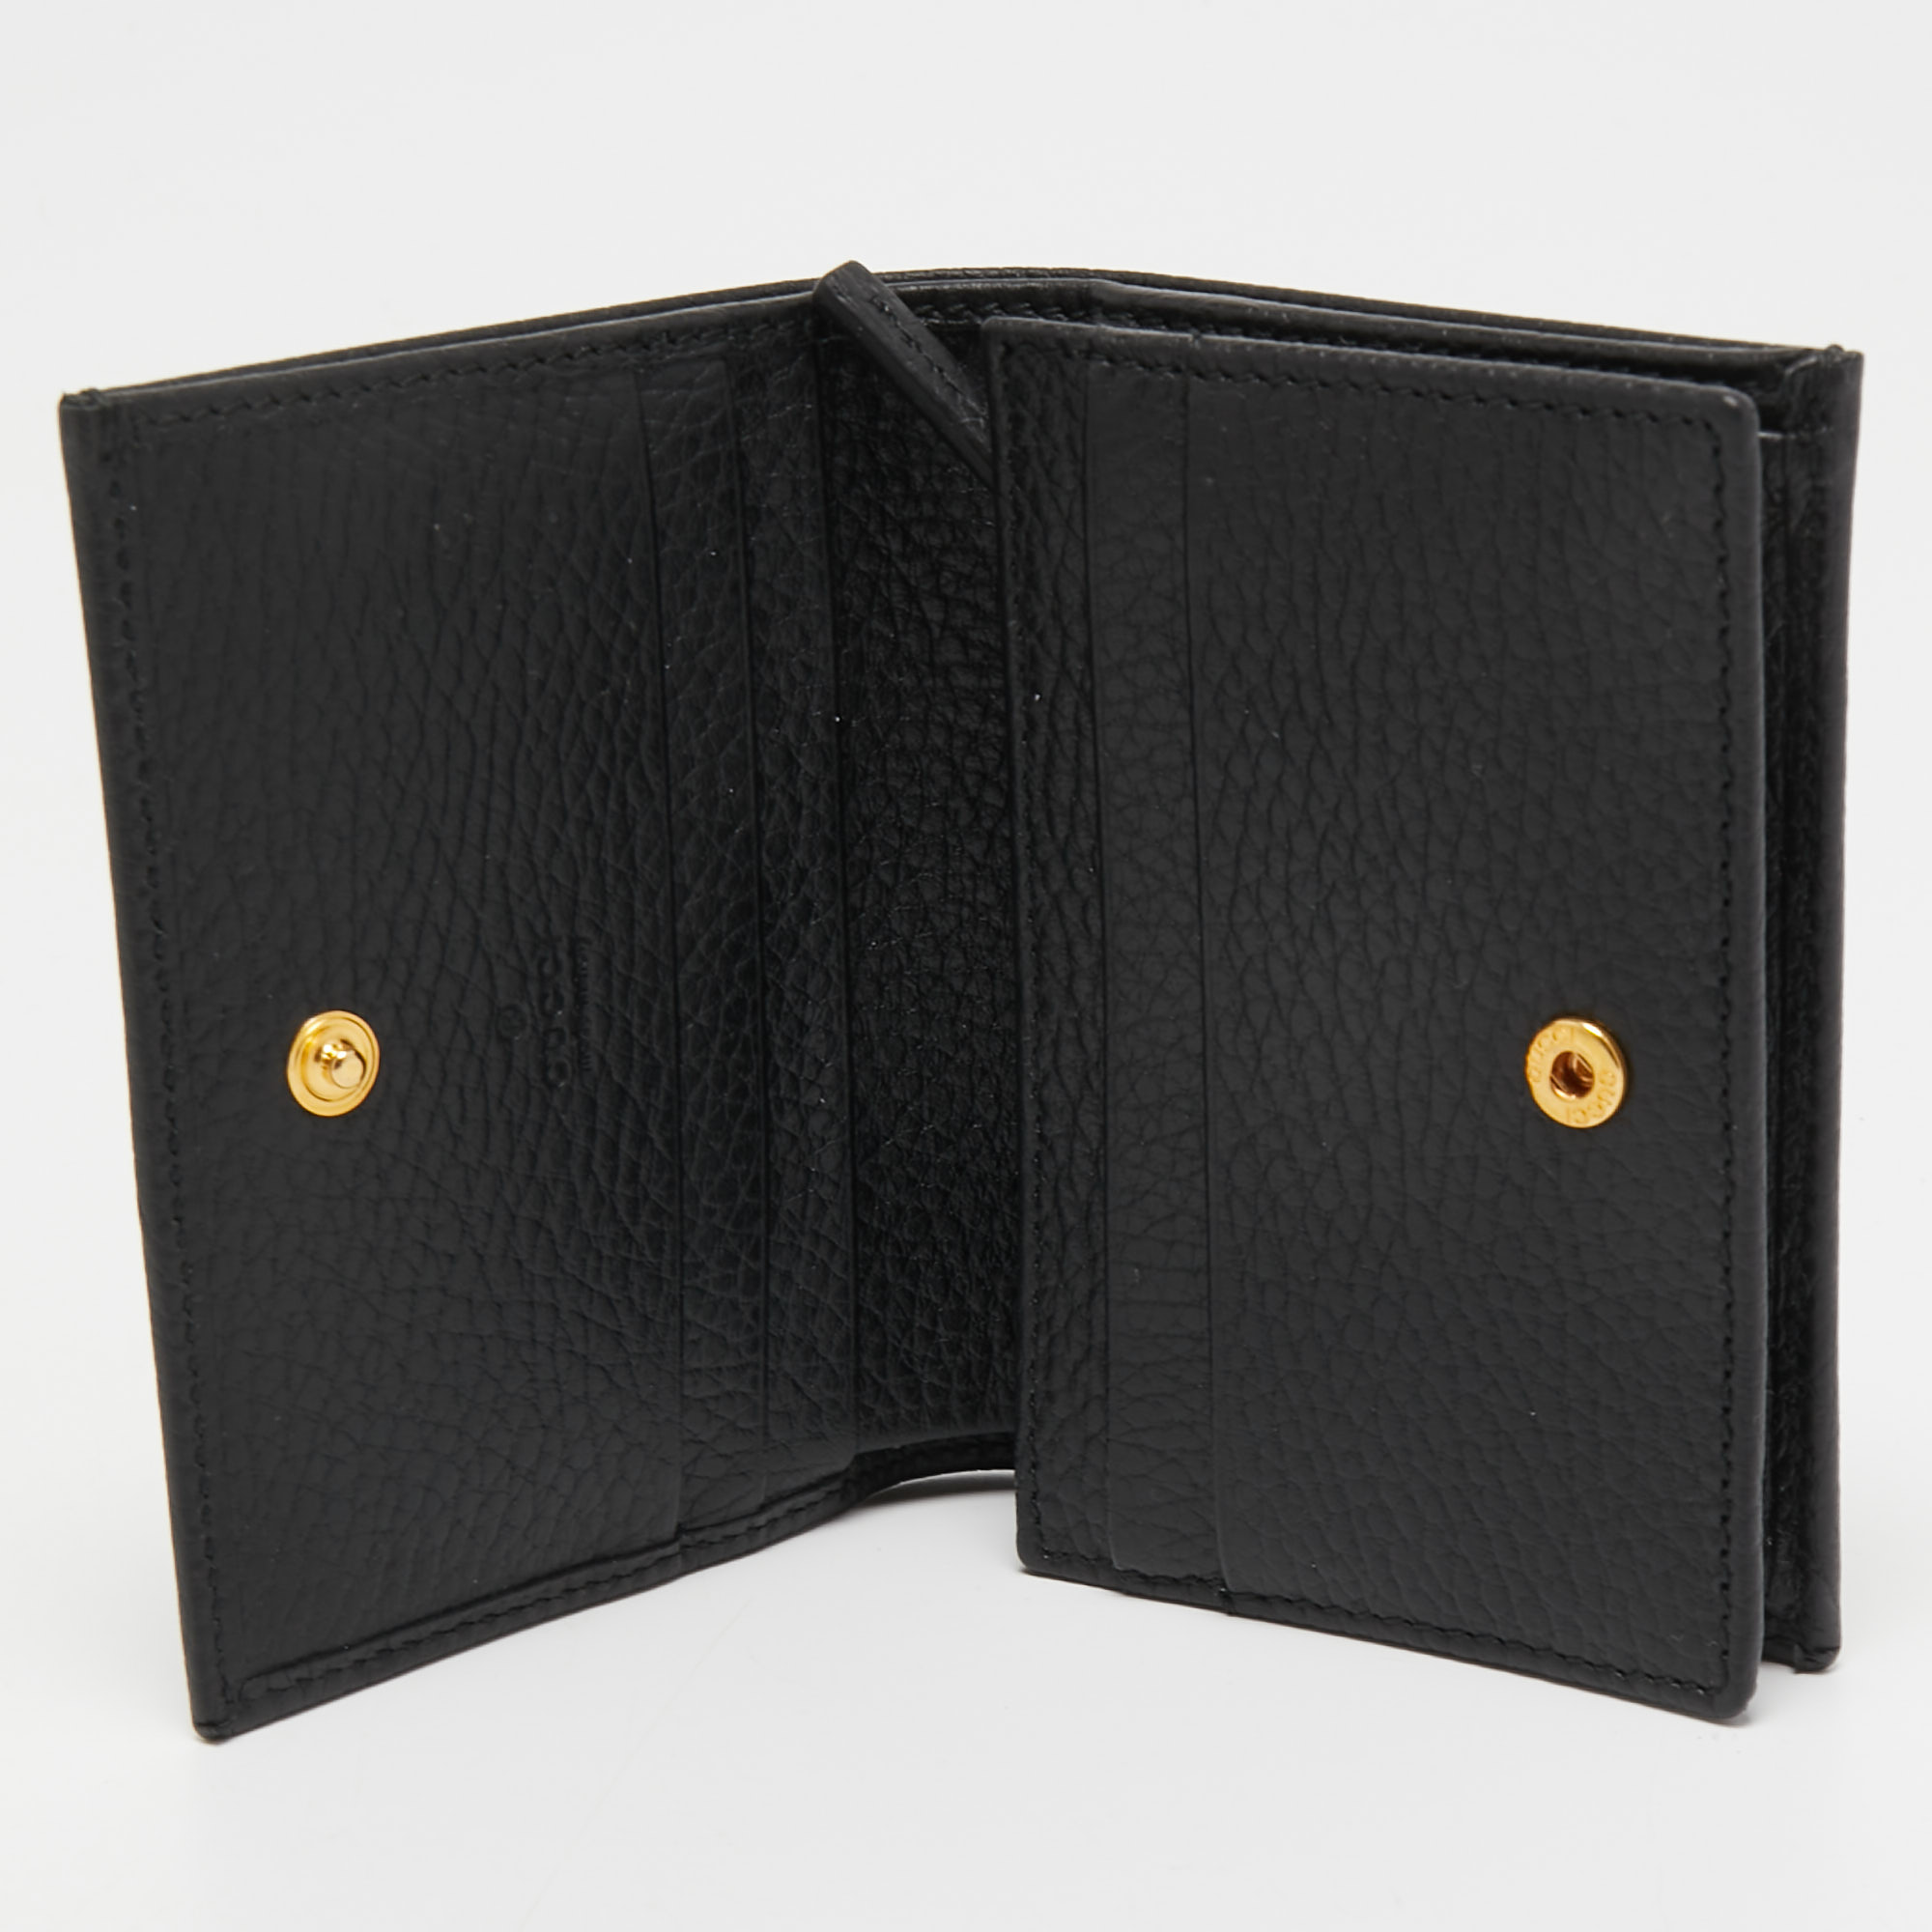 

Gucci Black Leather GG Marmont Flap Card Case